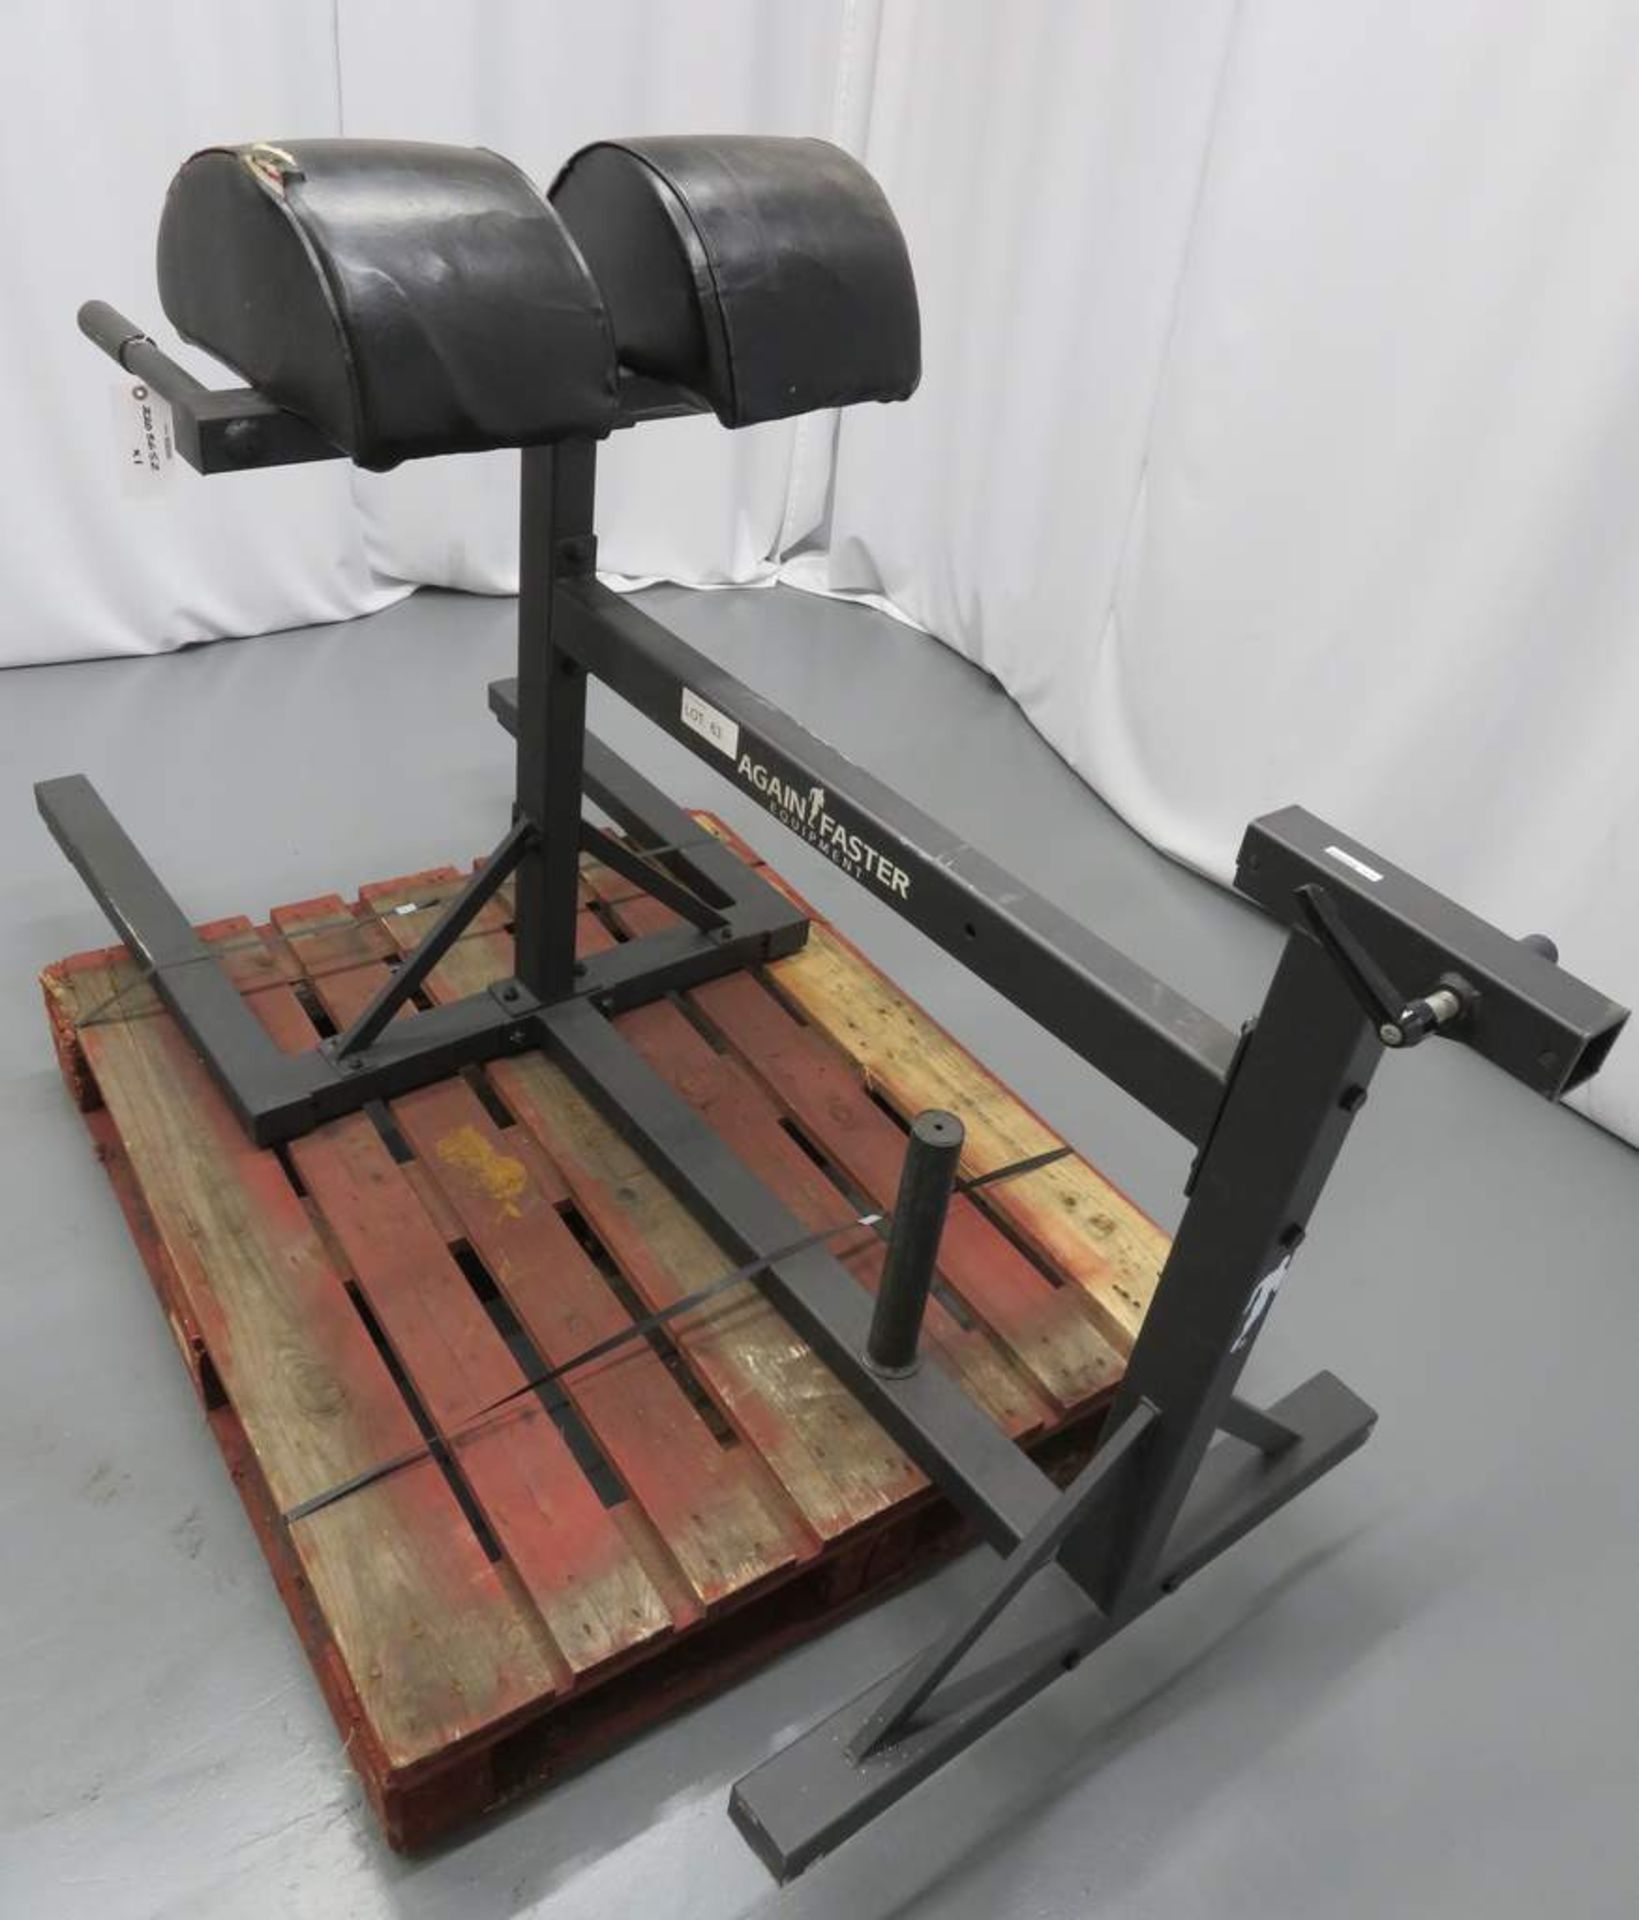 Again Faster Equipment Multi Function Sit Up Station - Missing Leg Support Bar. - Image 4 of 4